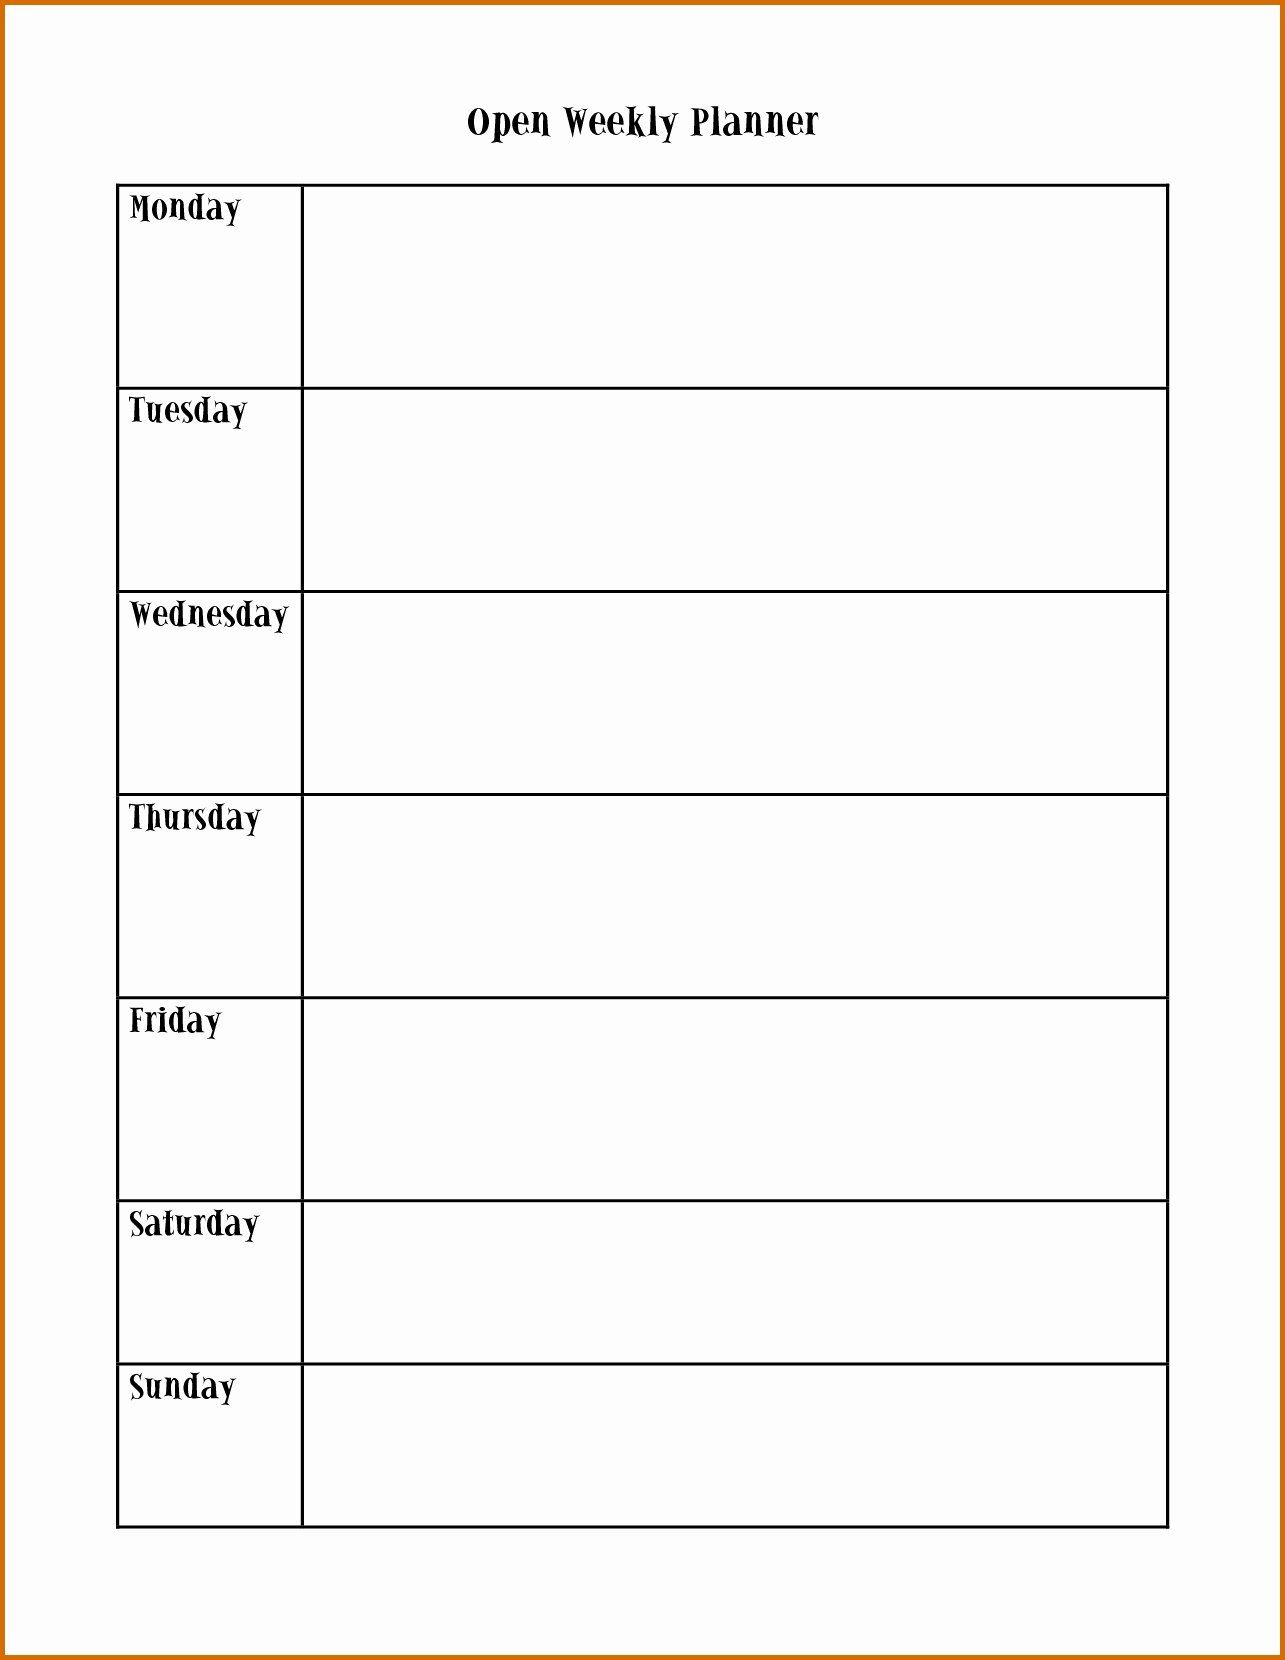 Weekly Calendar Monday Through Friday In 2020 | Monthly